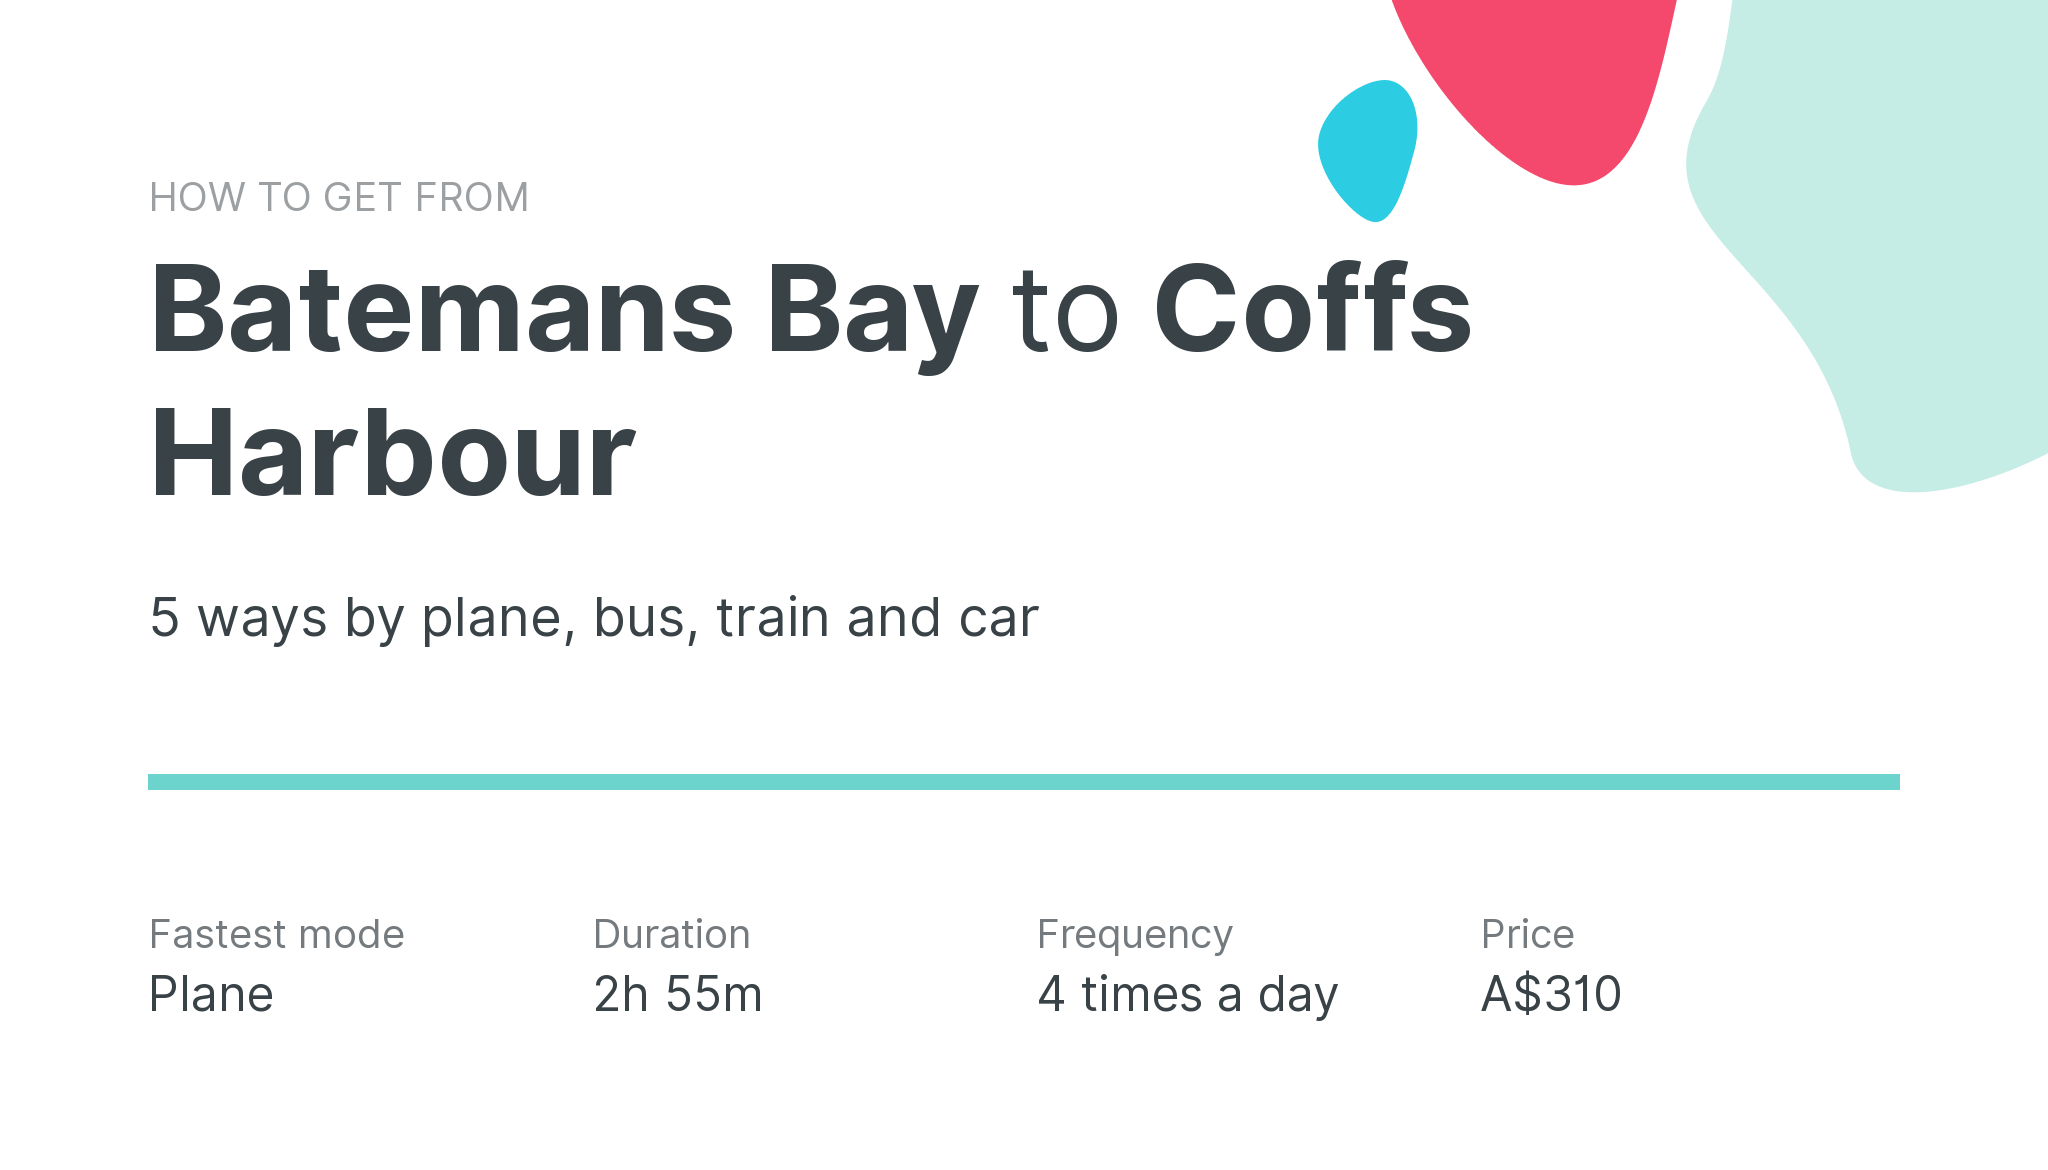 How do I get from Batemans Bay to Coffs Harbour